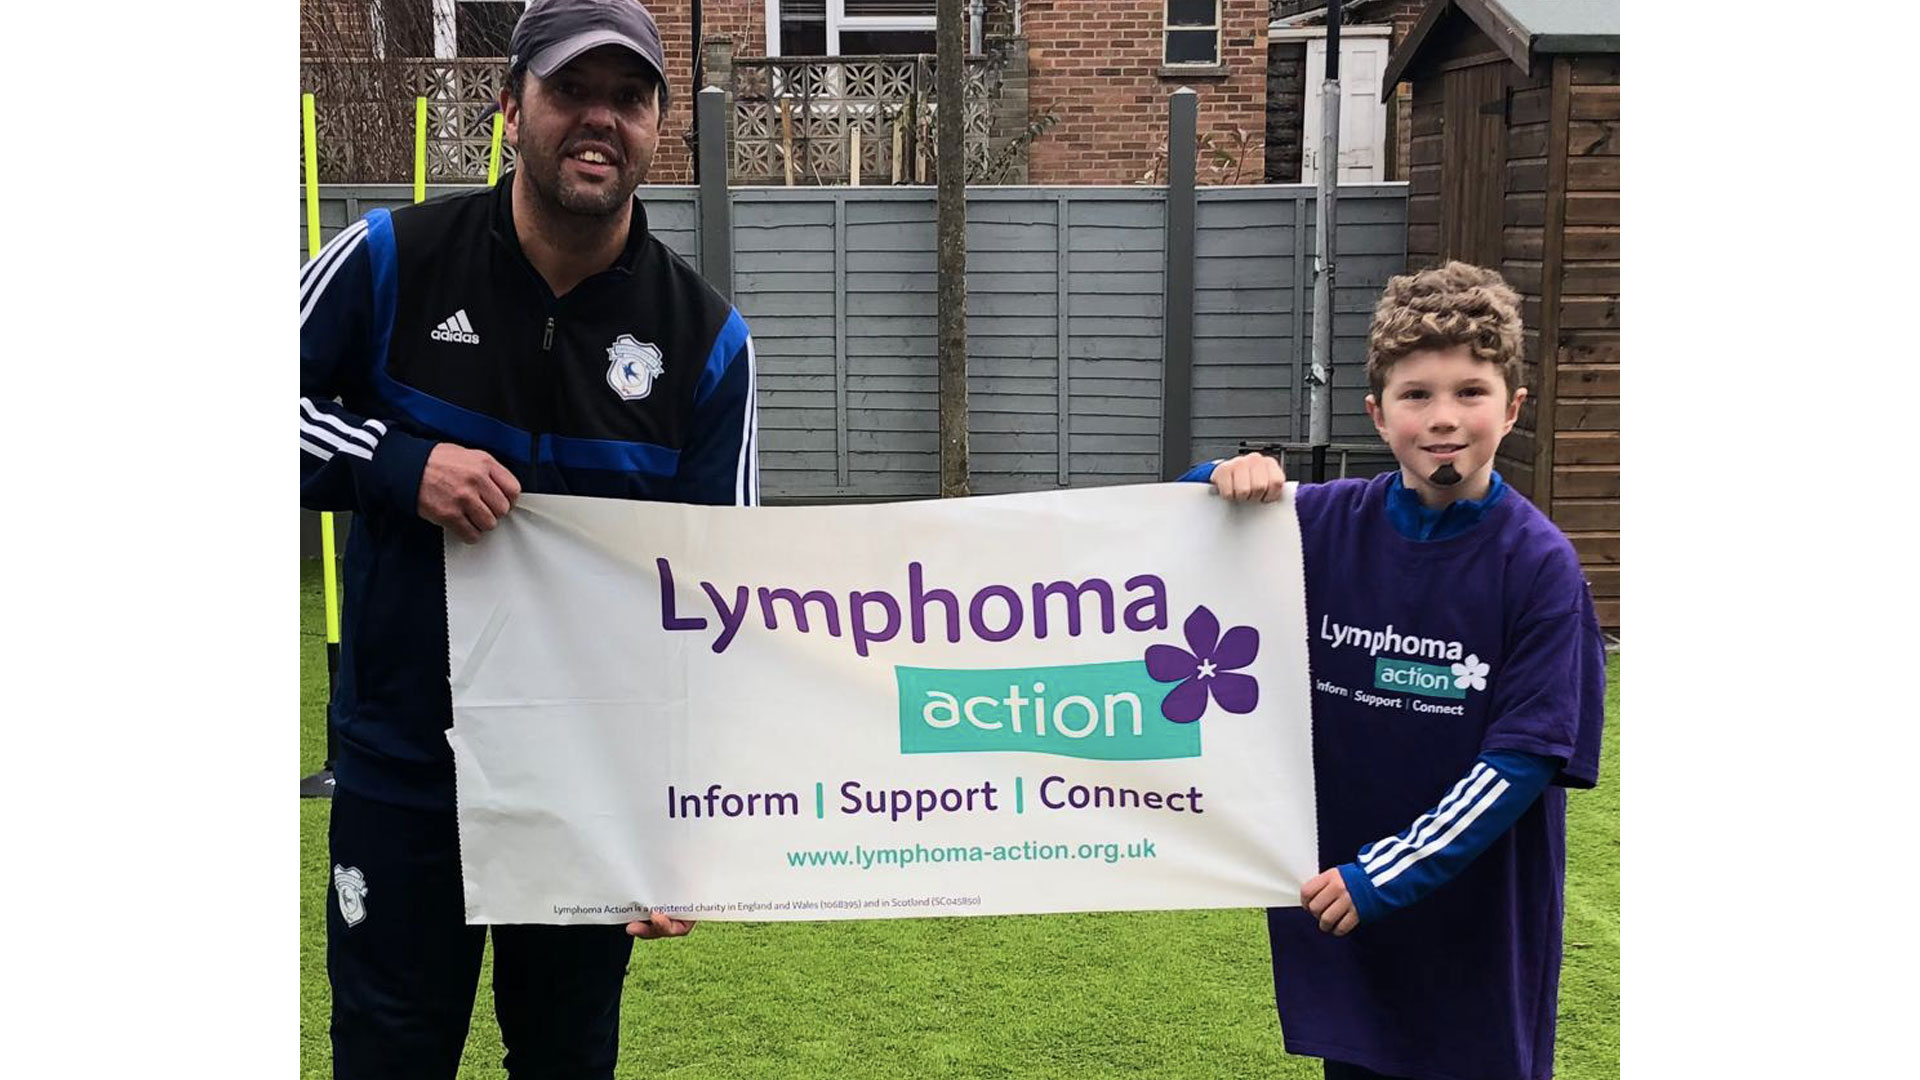 The City Academy support Lymphoma Action...